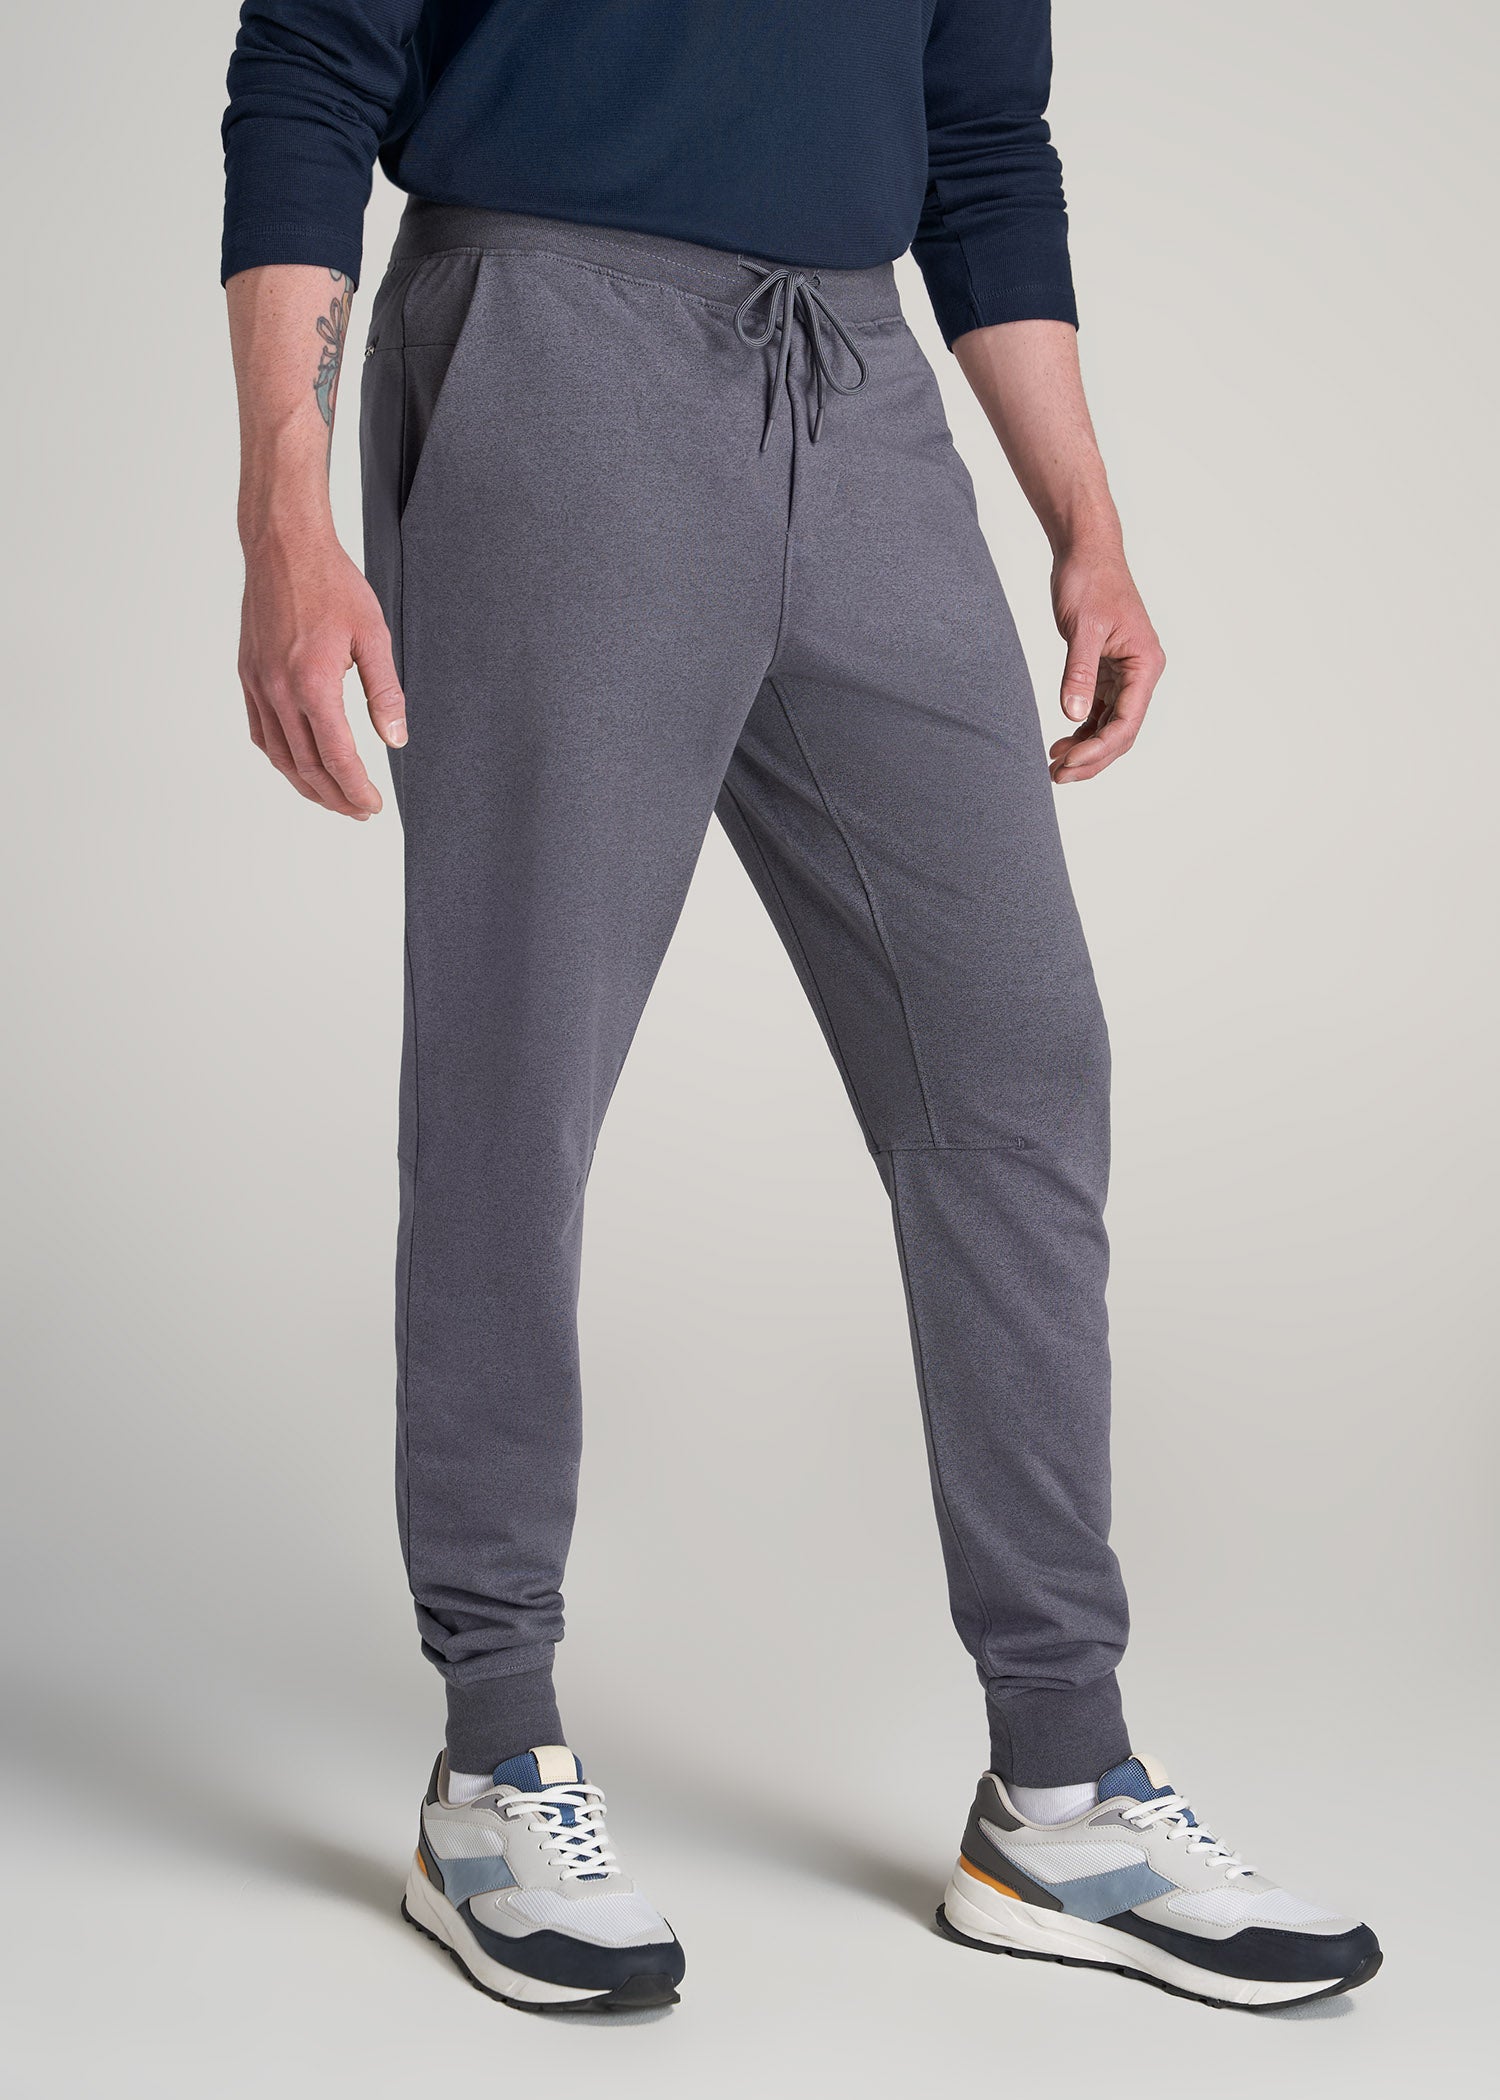 A.T. Performance Slim French Terry Joggers for Tall Men in Tech Charcoal Mix